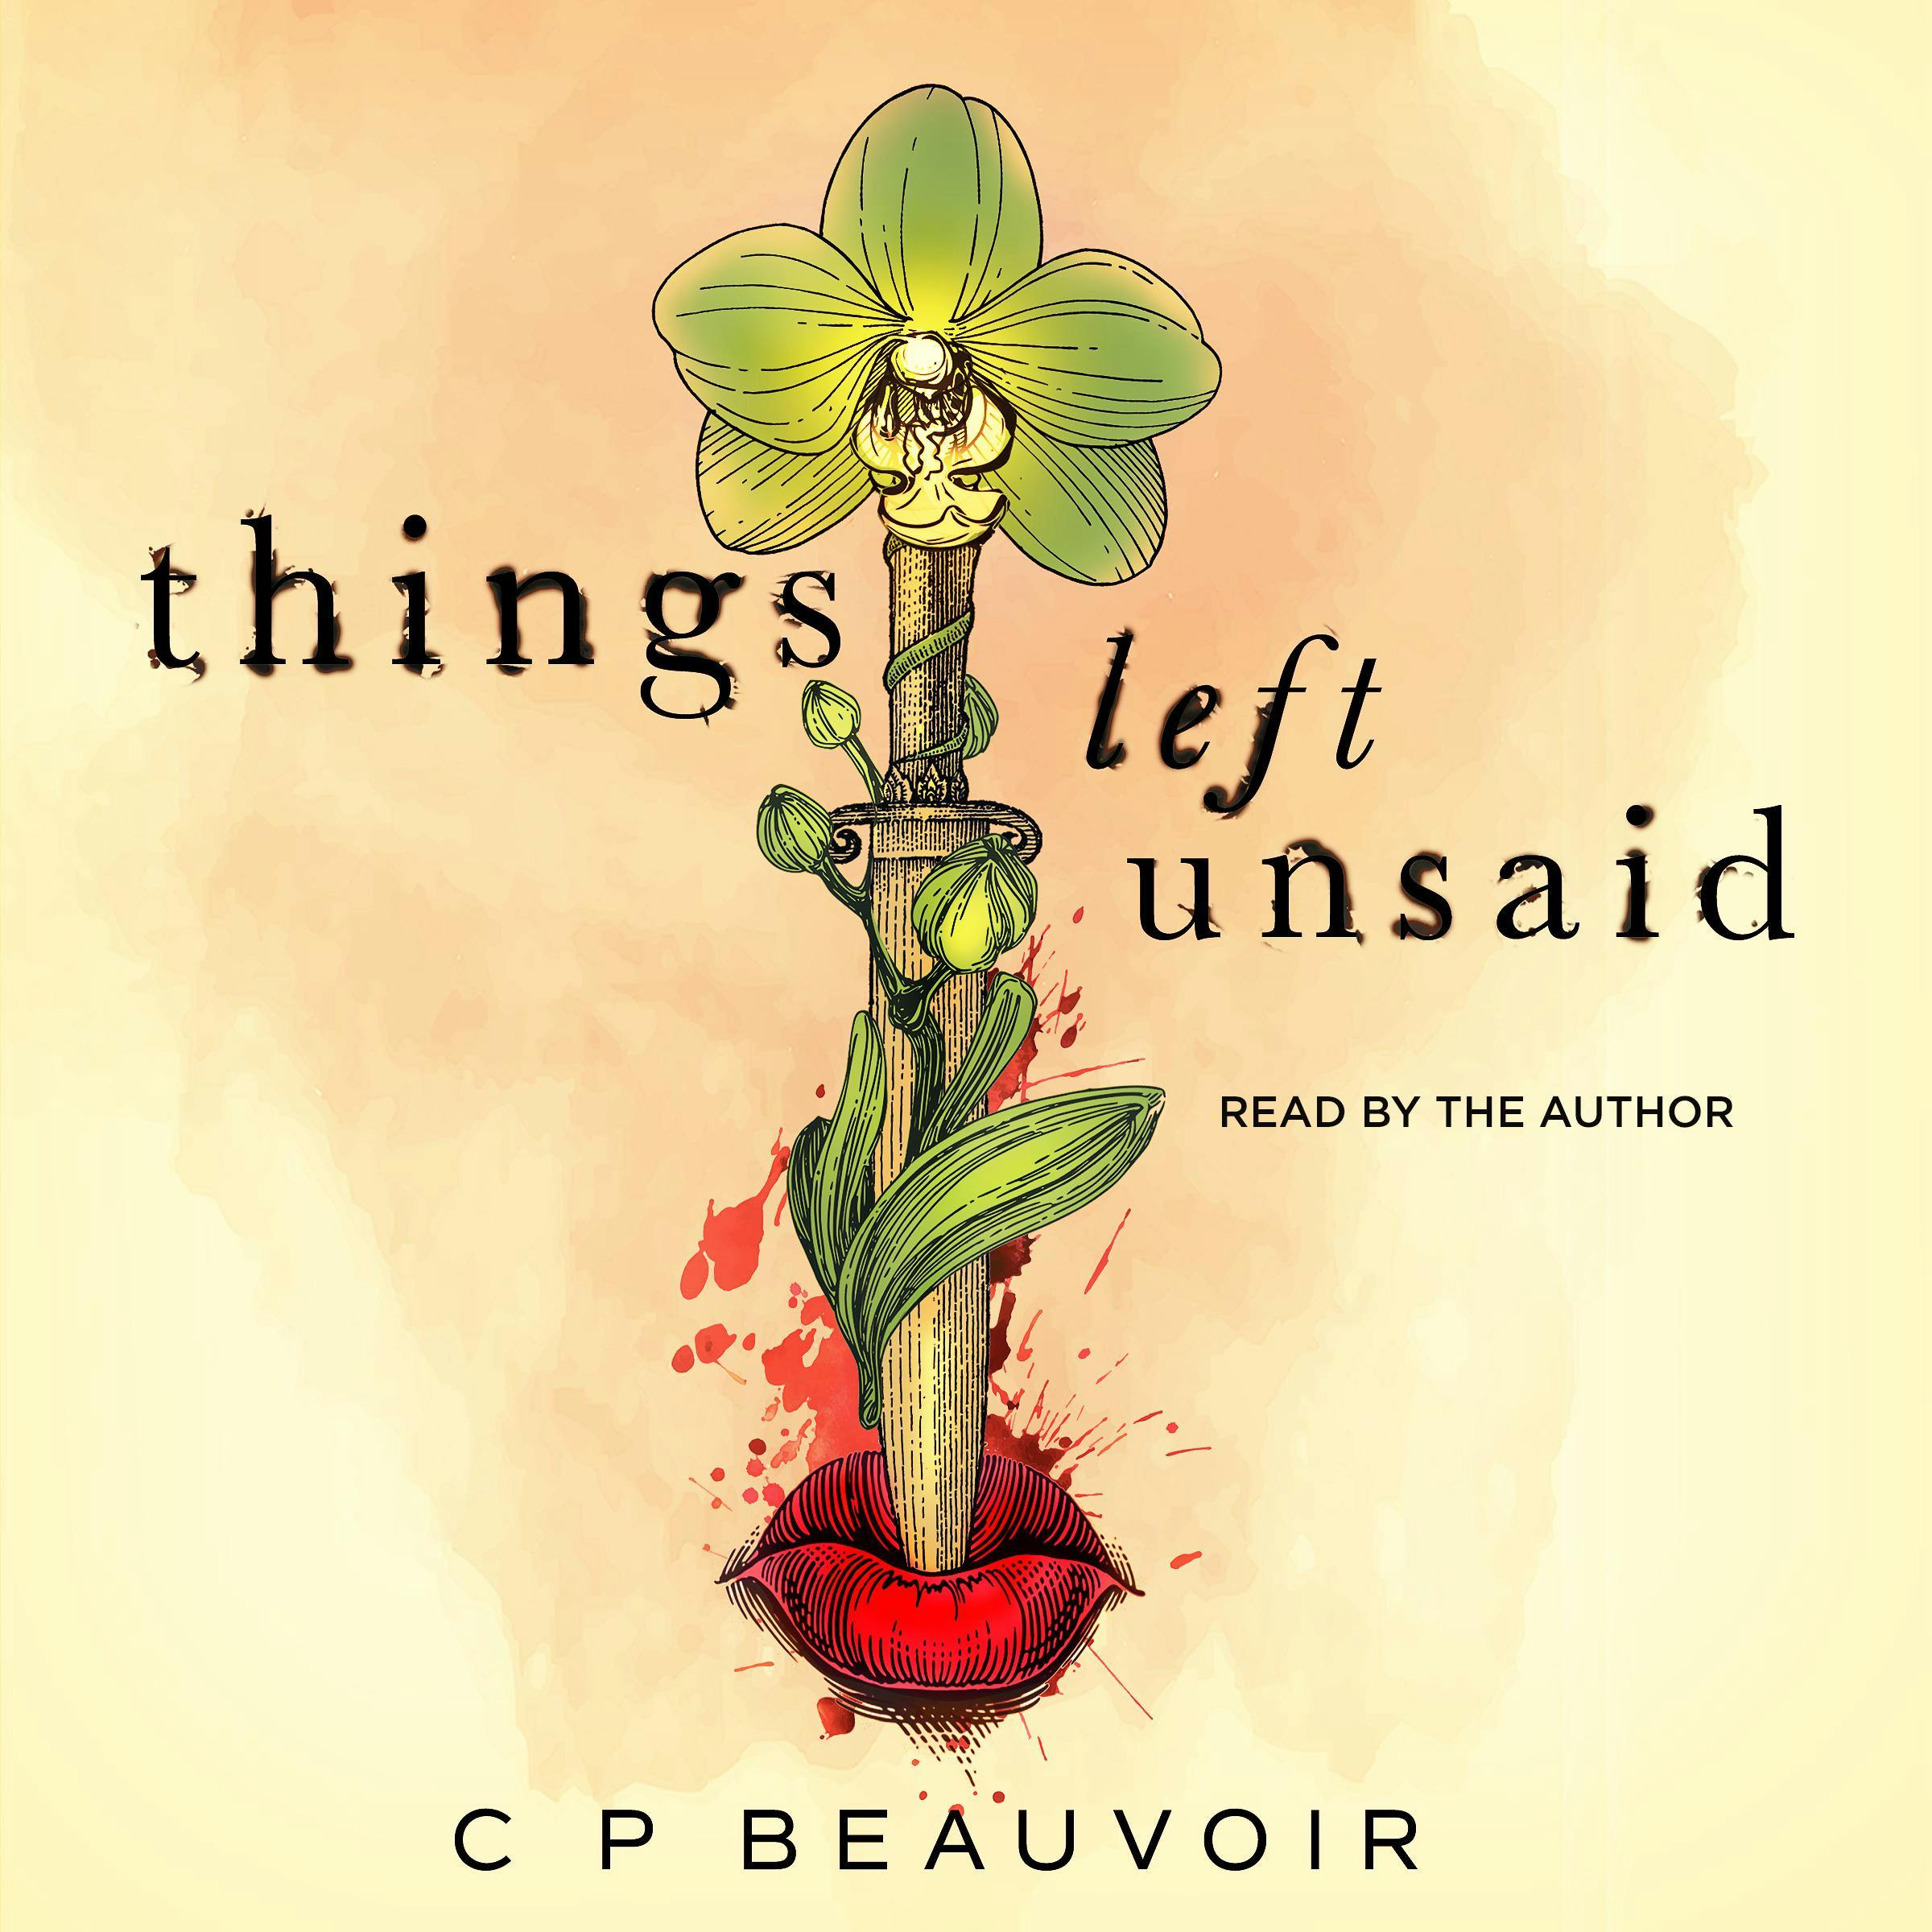 things left unsaid - C P Beauvoir